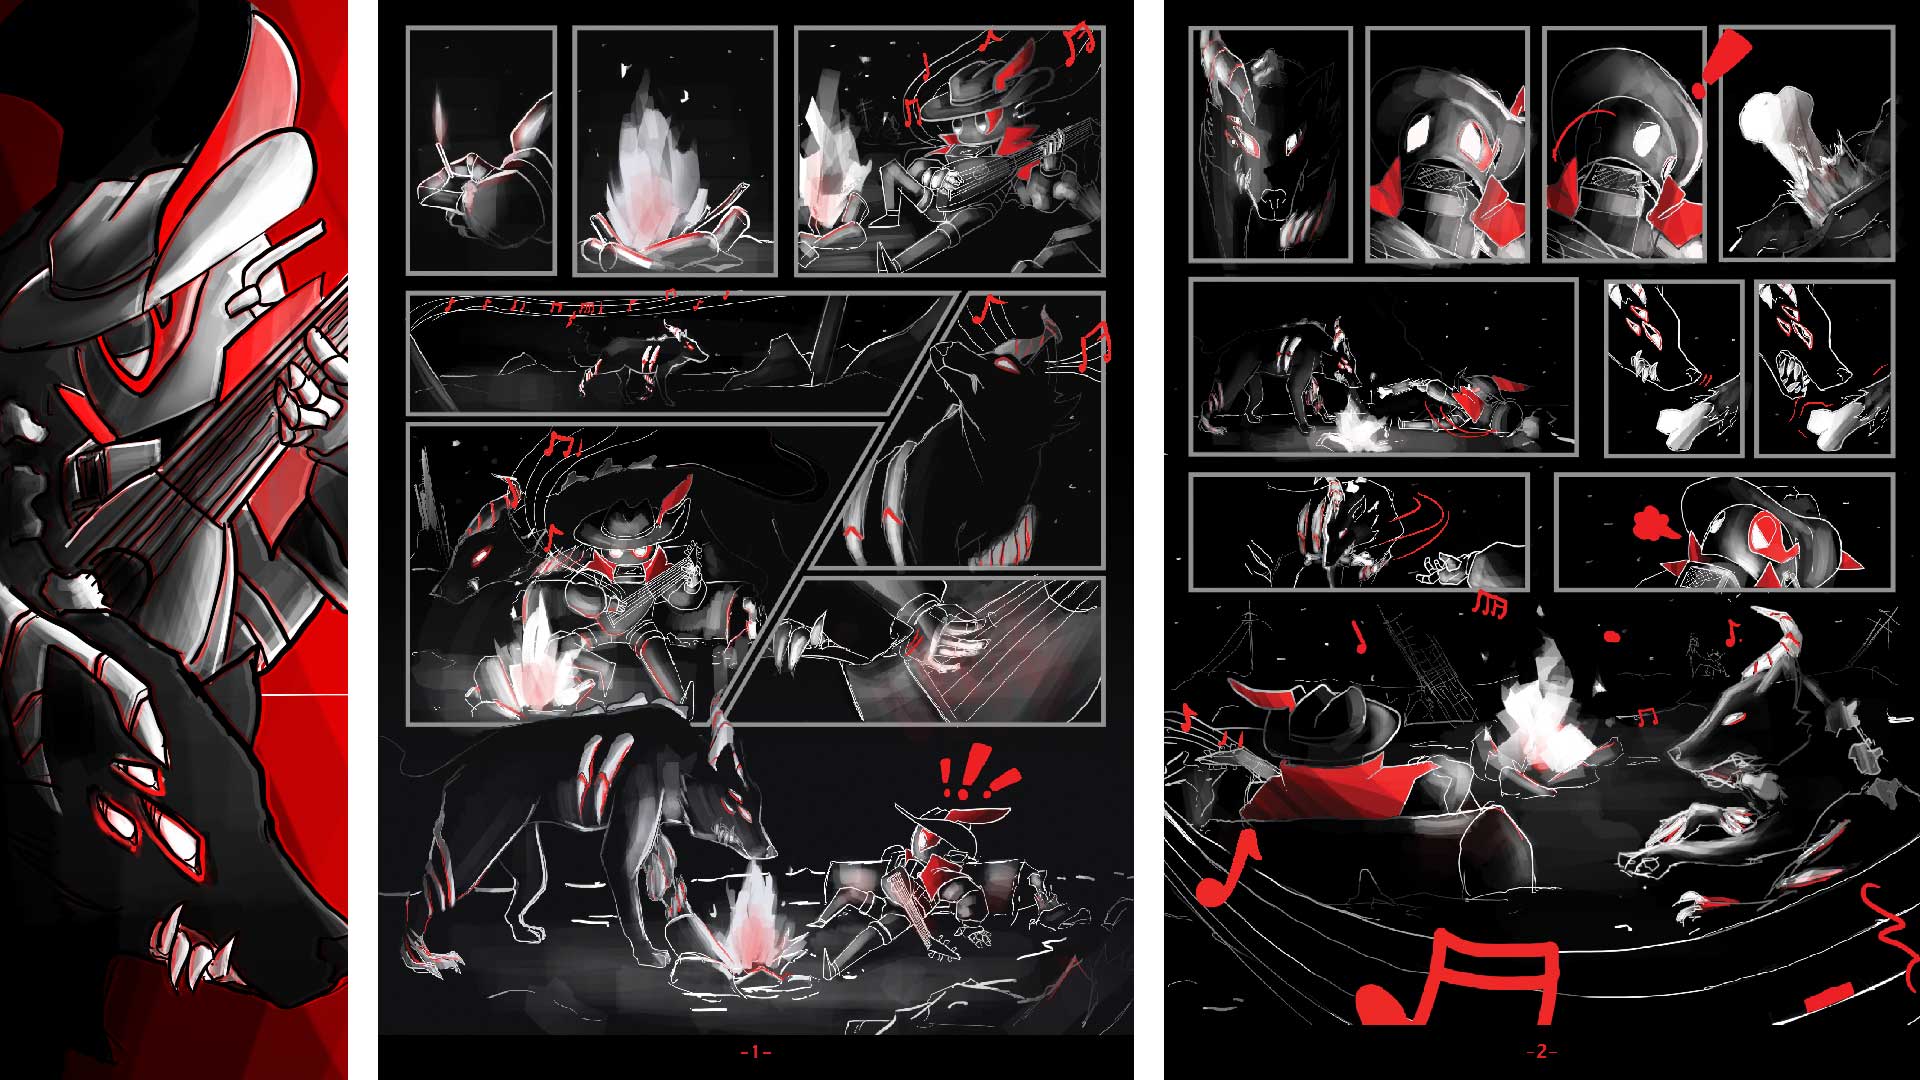 The graphic novel features minimal colours: black, white, and red. The story begins on the left with the robot lighting a fire and beginning to play a song on his lute in the wasteland. The center panel introduces the wolf that has warped bones poking out of its skin a horn for an ear and three eyes on the side of its face. The wolf hears the music and begins to wander and surprises the robot who is caught off guard. Face to face with each other, the robot notices that there is a bone with some meat on it and offers it to the wolf, who takes a second before accepting it and settling down beside the relieved robot who continues playing as the graphic novel spread ends.